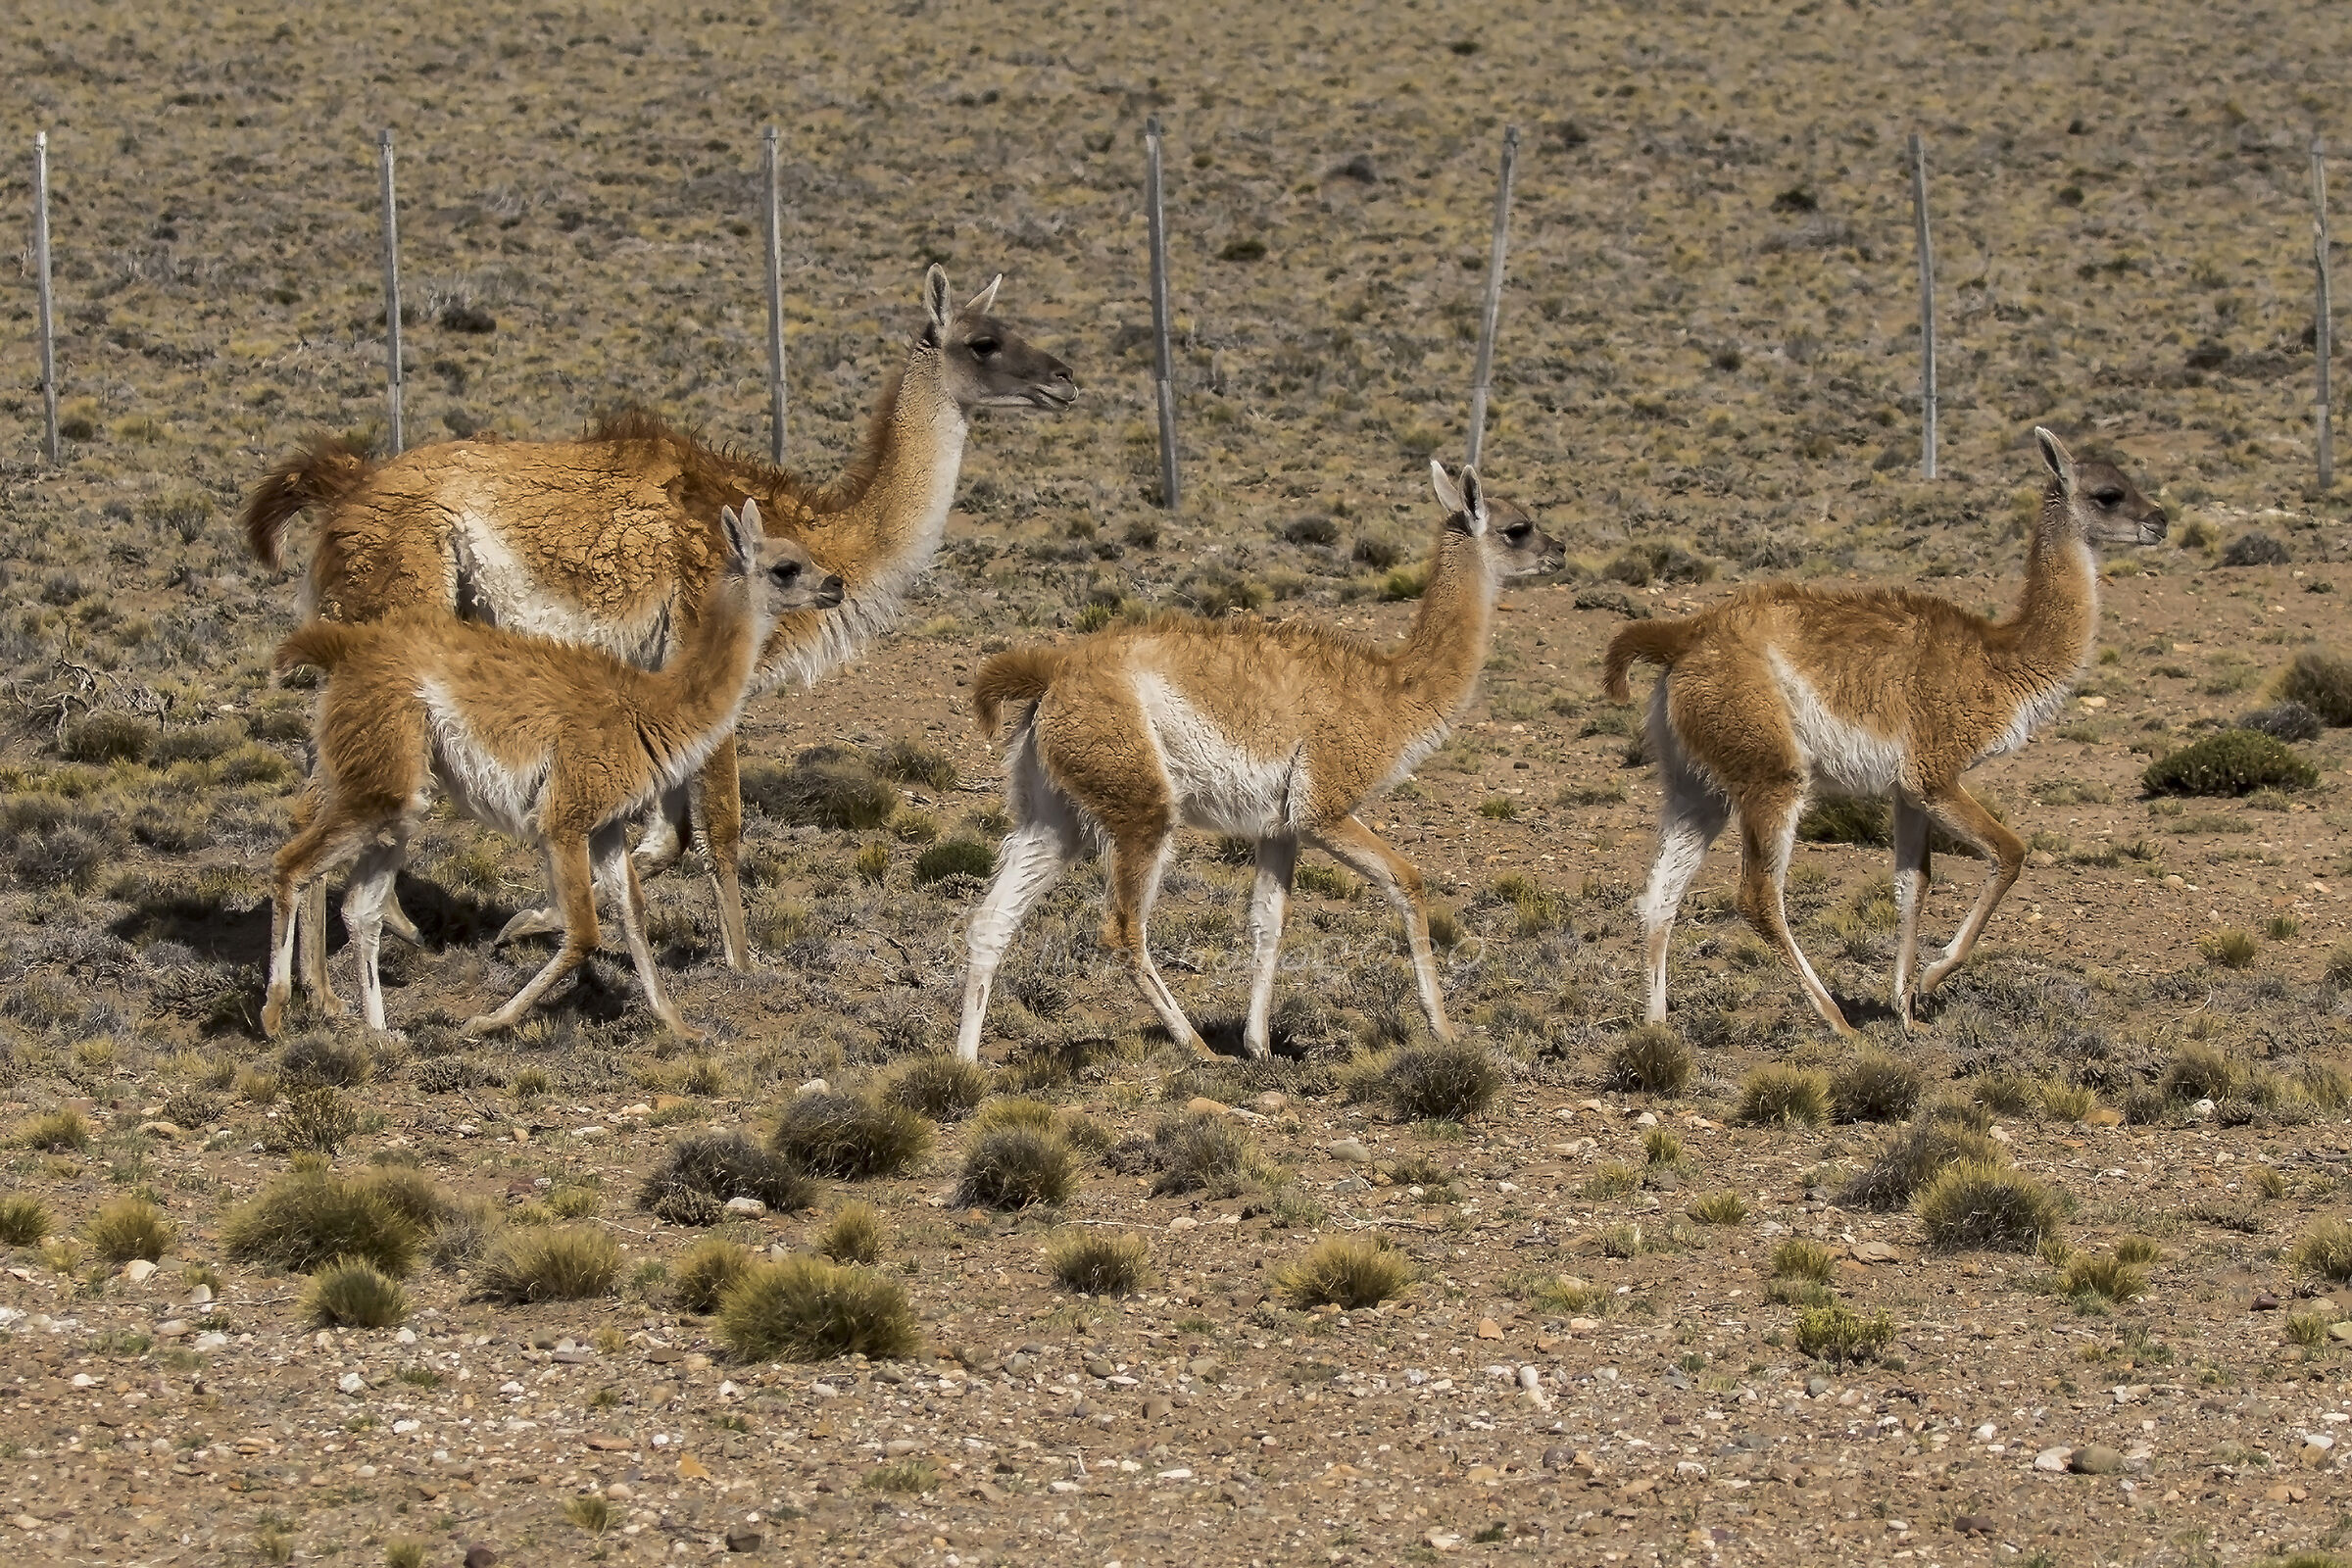 The family of guanacos...